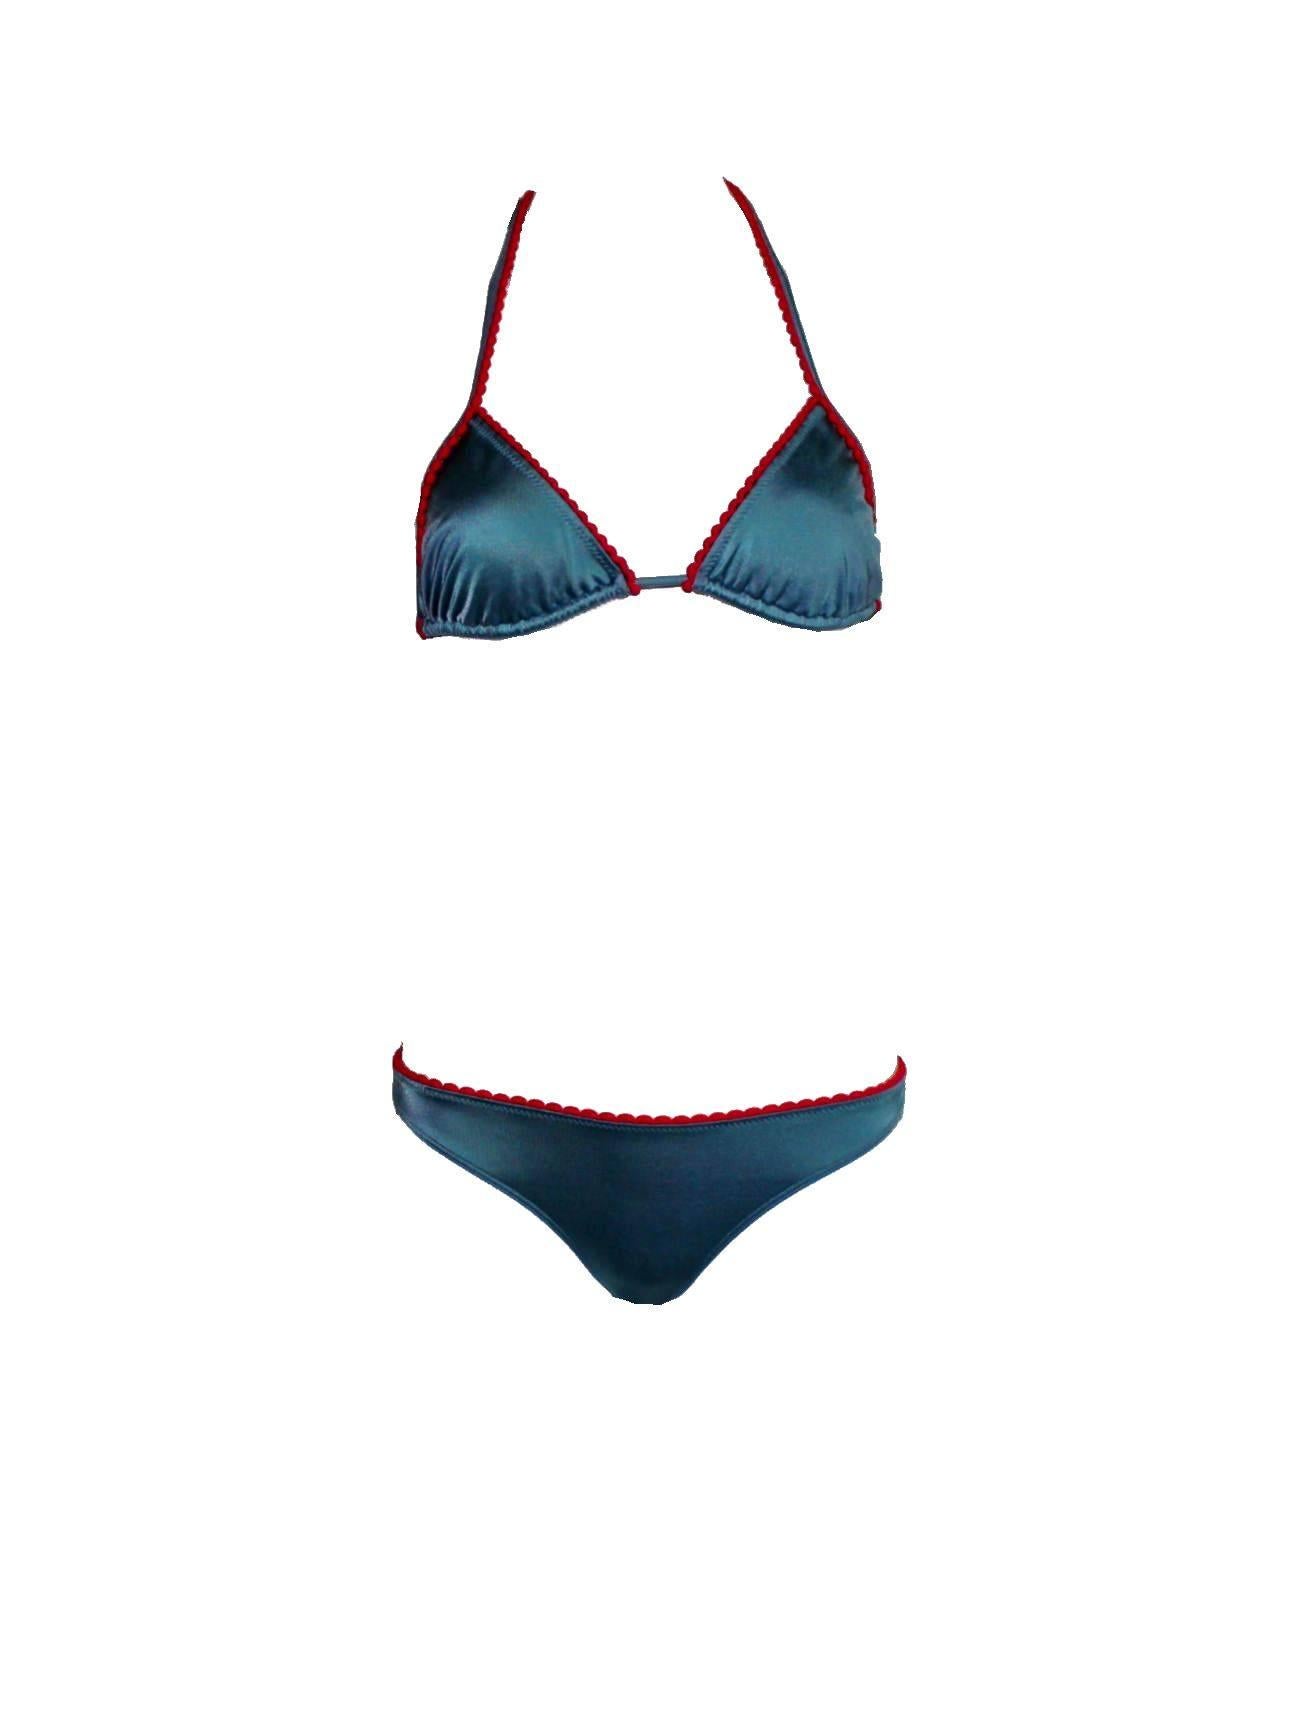     Classic CHANEL signature two-pieces bikini swimsuit
    Beautiful cut
    Two pieces
    Fully lined
    Comes brandnew with tags
Made in France
    Complete in the original Chanel packaging, intact hygenic protection, extra fabric  and care